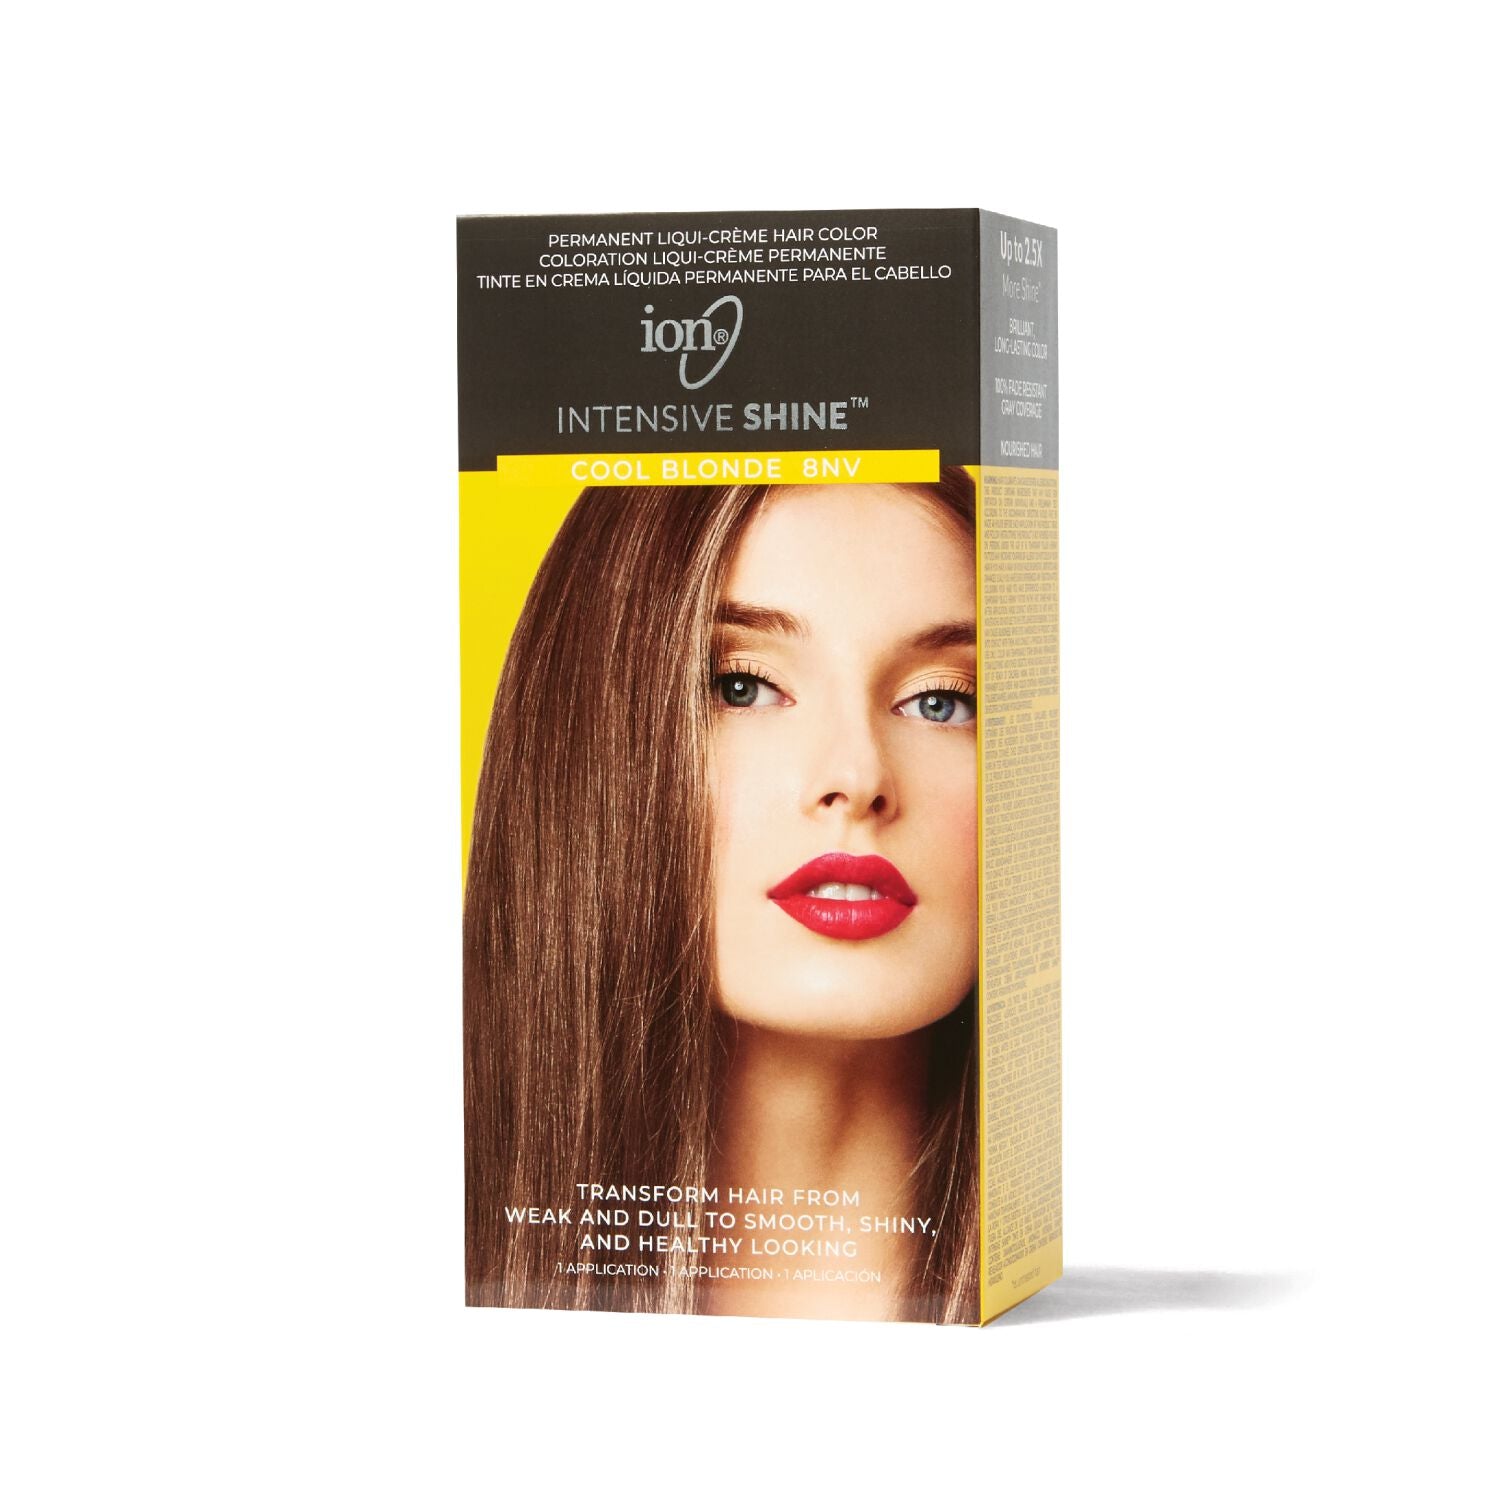 Intensive Shine  by   ion Intensive Shine Hair Color Kit Cool Blonde 8NV